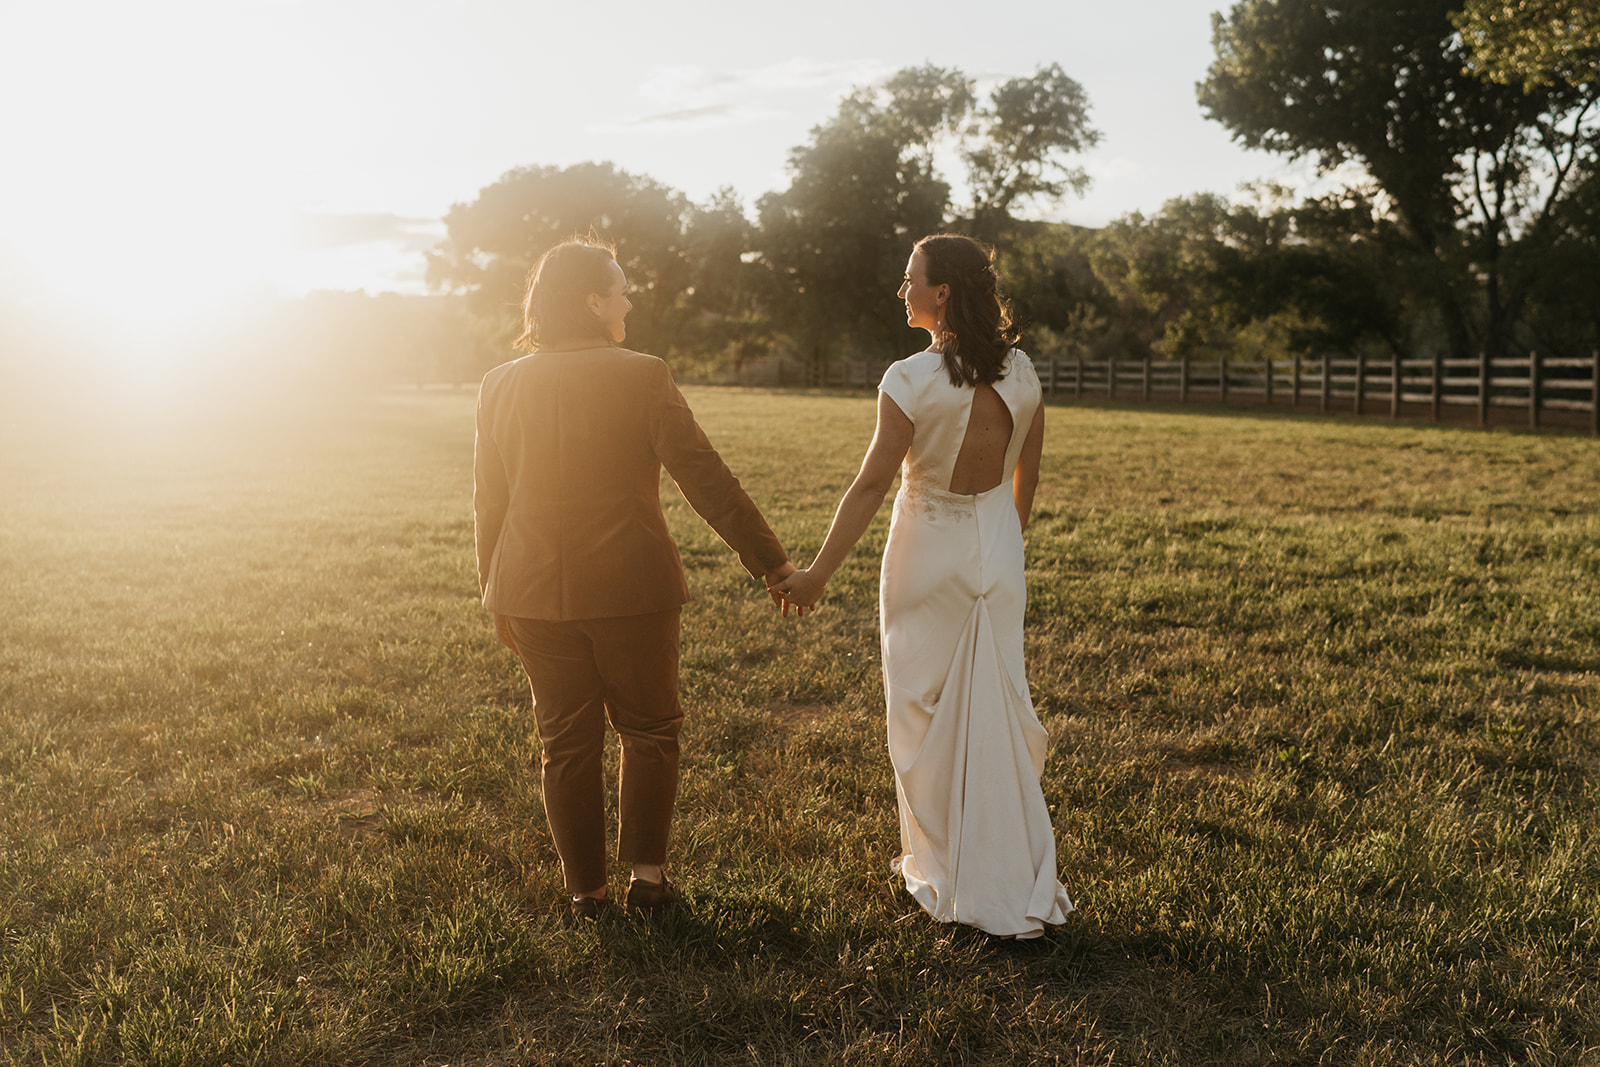 Two brides embracing on their wedding day at sunset 